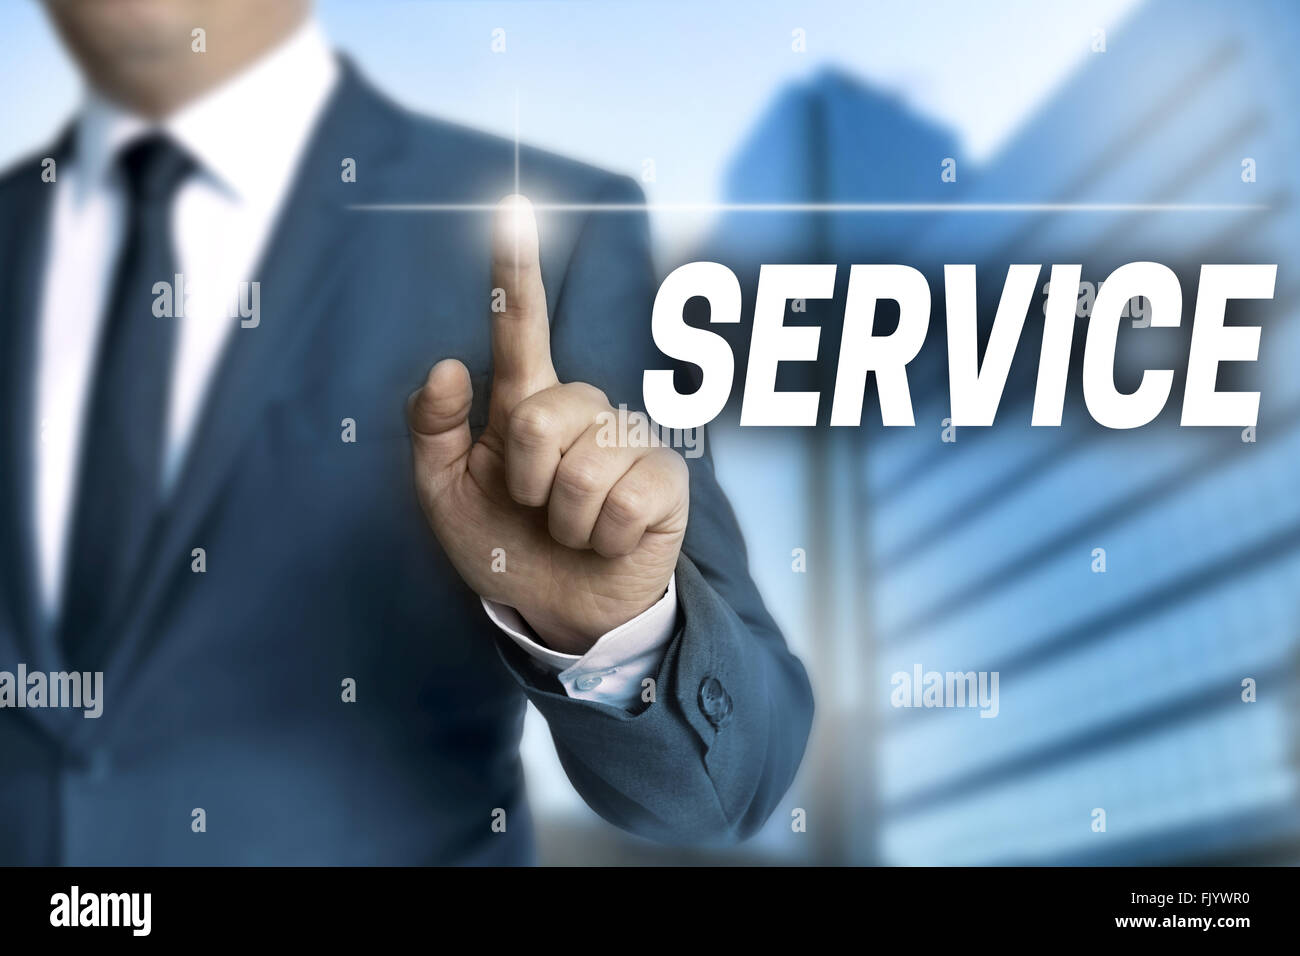 service touchscreen is operated by businessman. Stock Photo